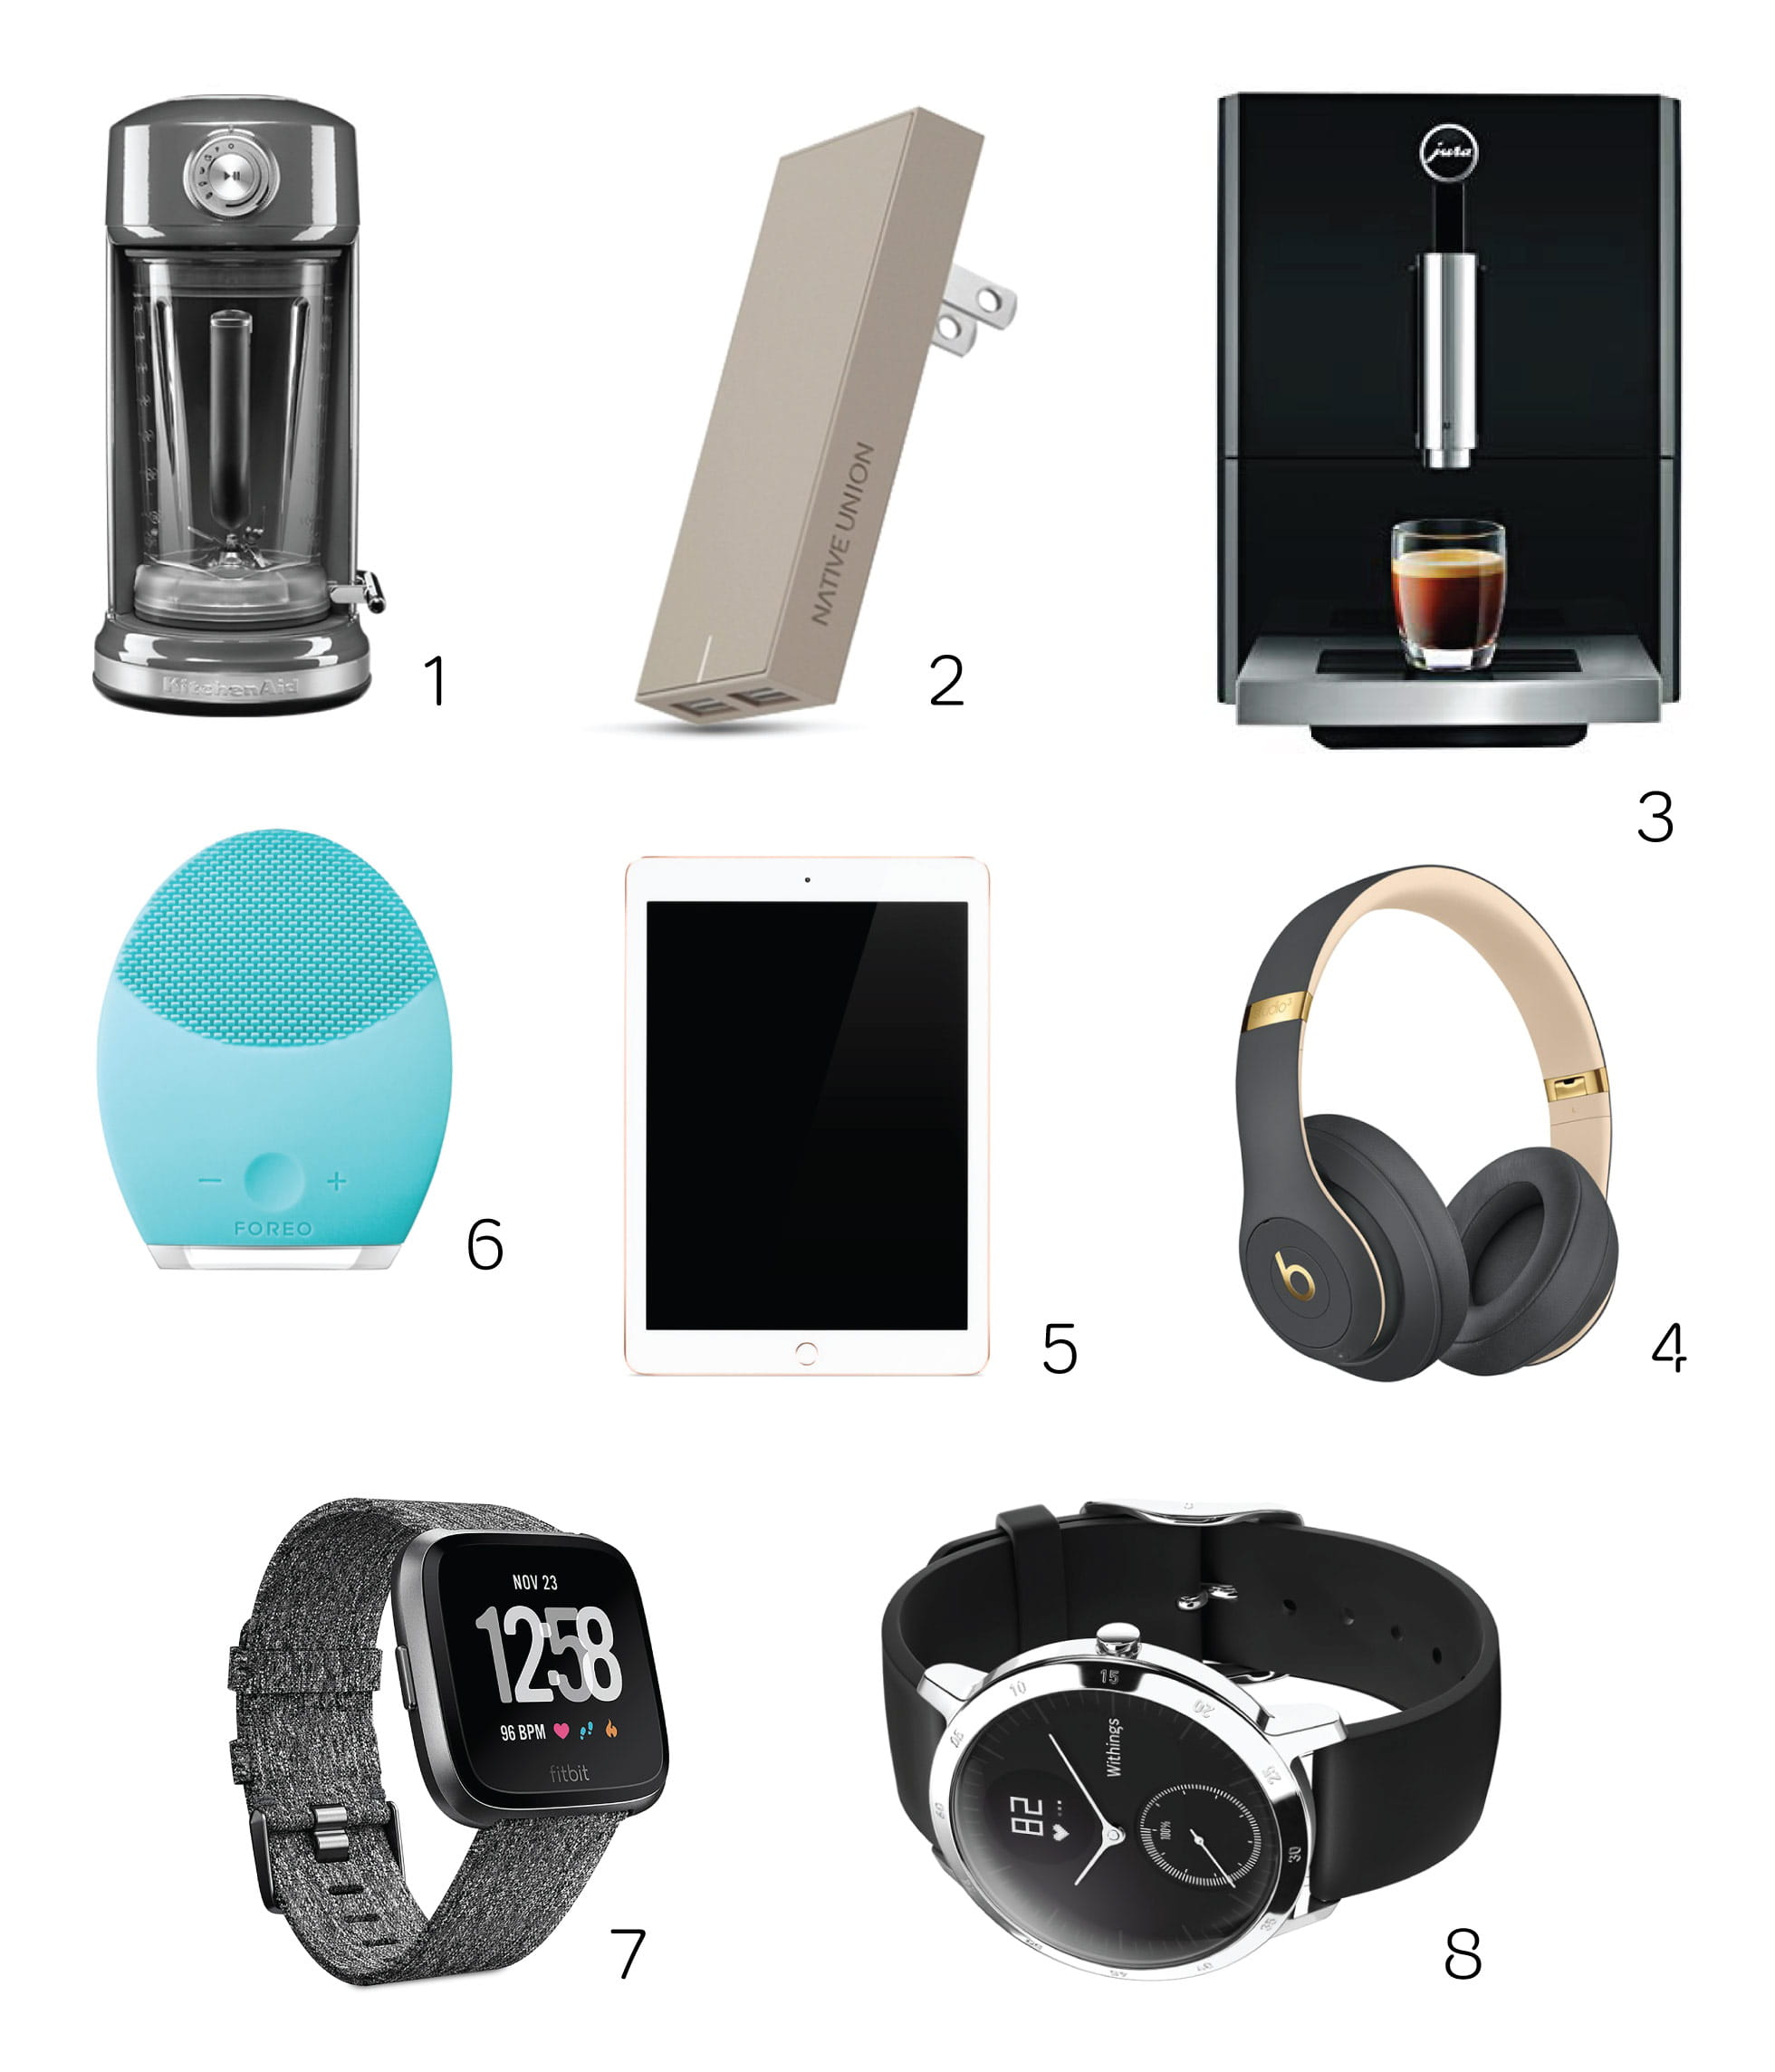 Meet the best gadgets for reaching the most common yearly resolutions